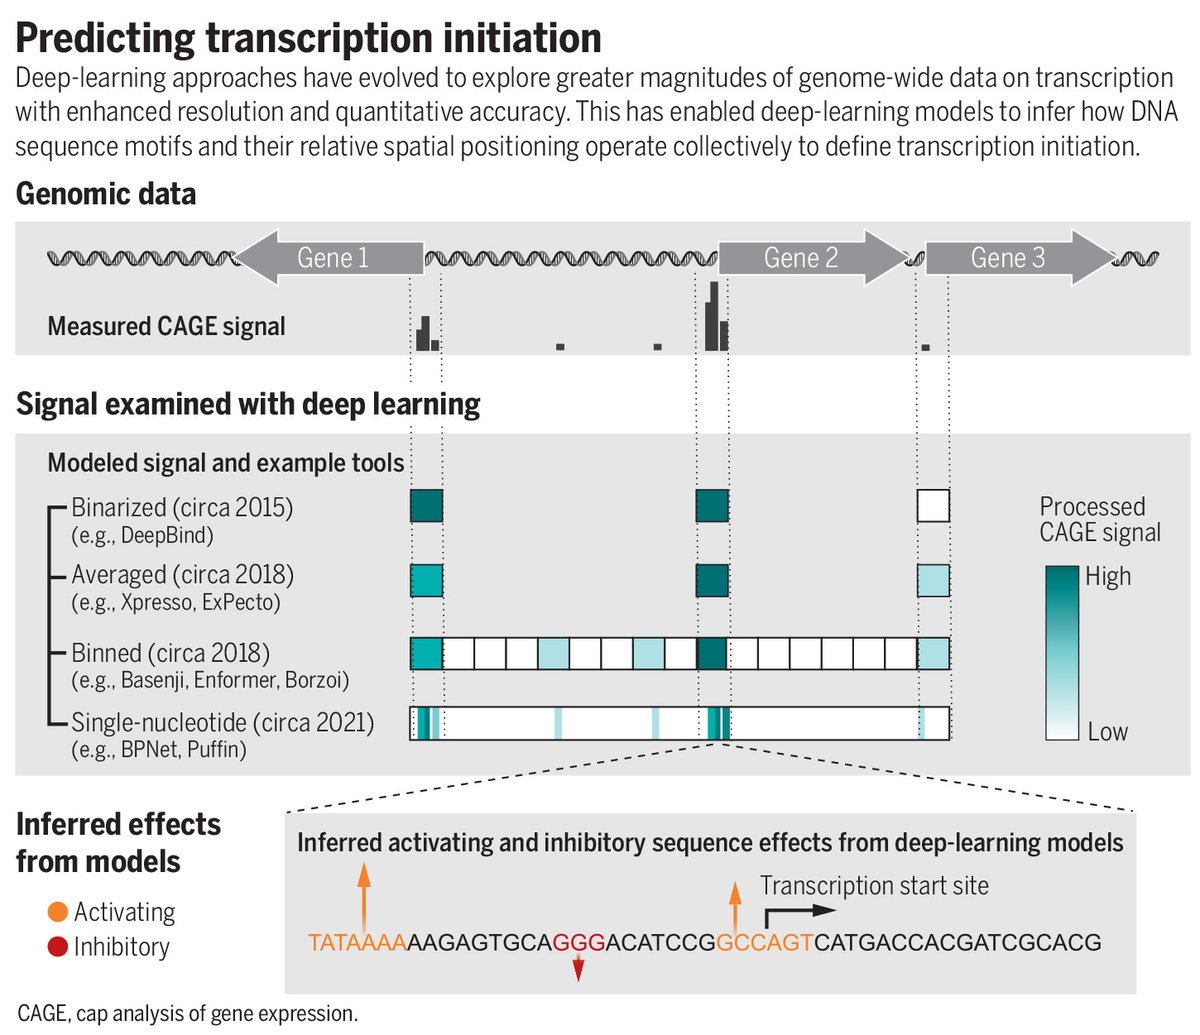 A new Science study defines a set of rules that govern transcription initiation and highlights the potential of using #DeepLearning approaches to understand how information is genetically encoded.

Learn more in a new #SciencePerspective: scim.ag/6Rv